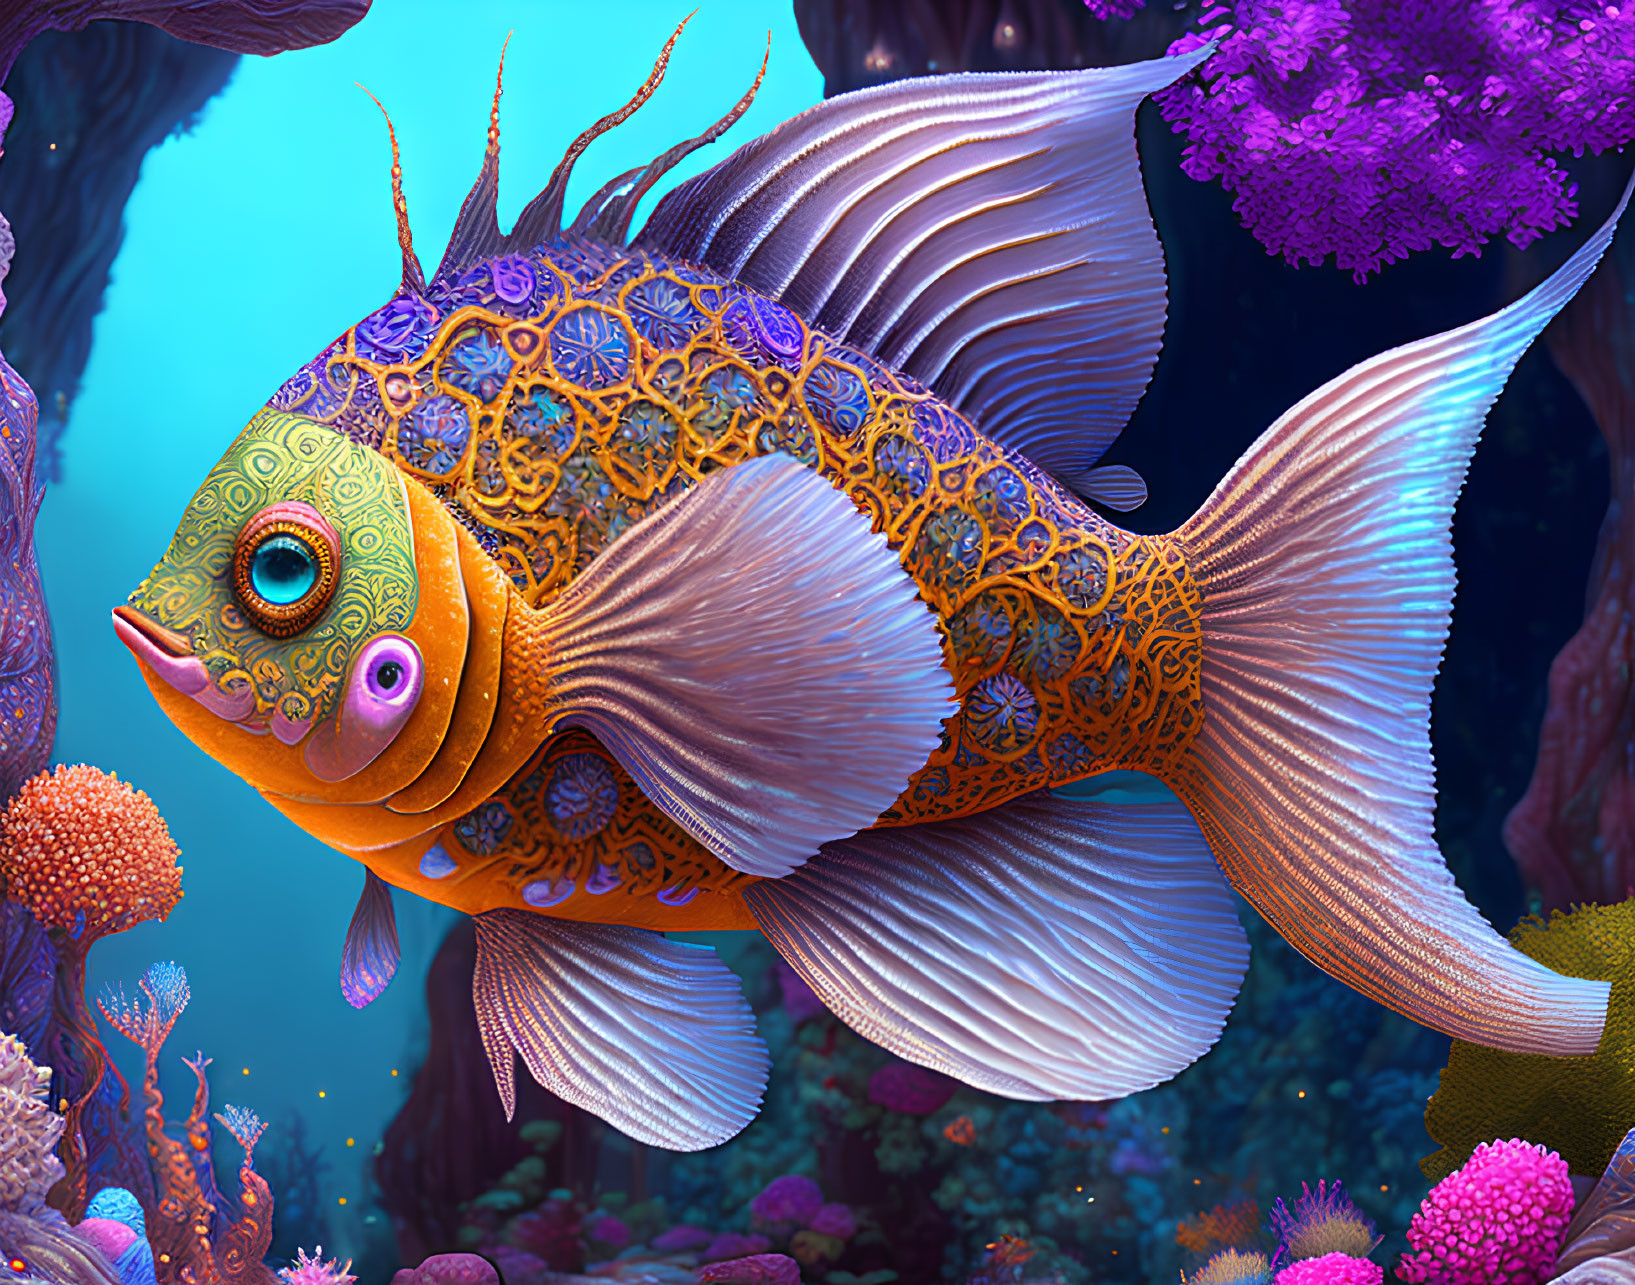 Colorful fish with intricate patterns in coral reef underwater scene